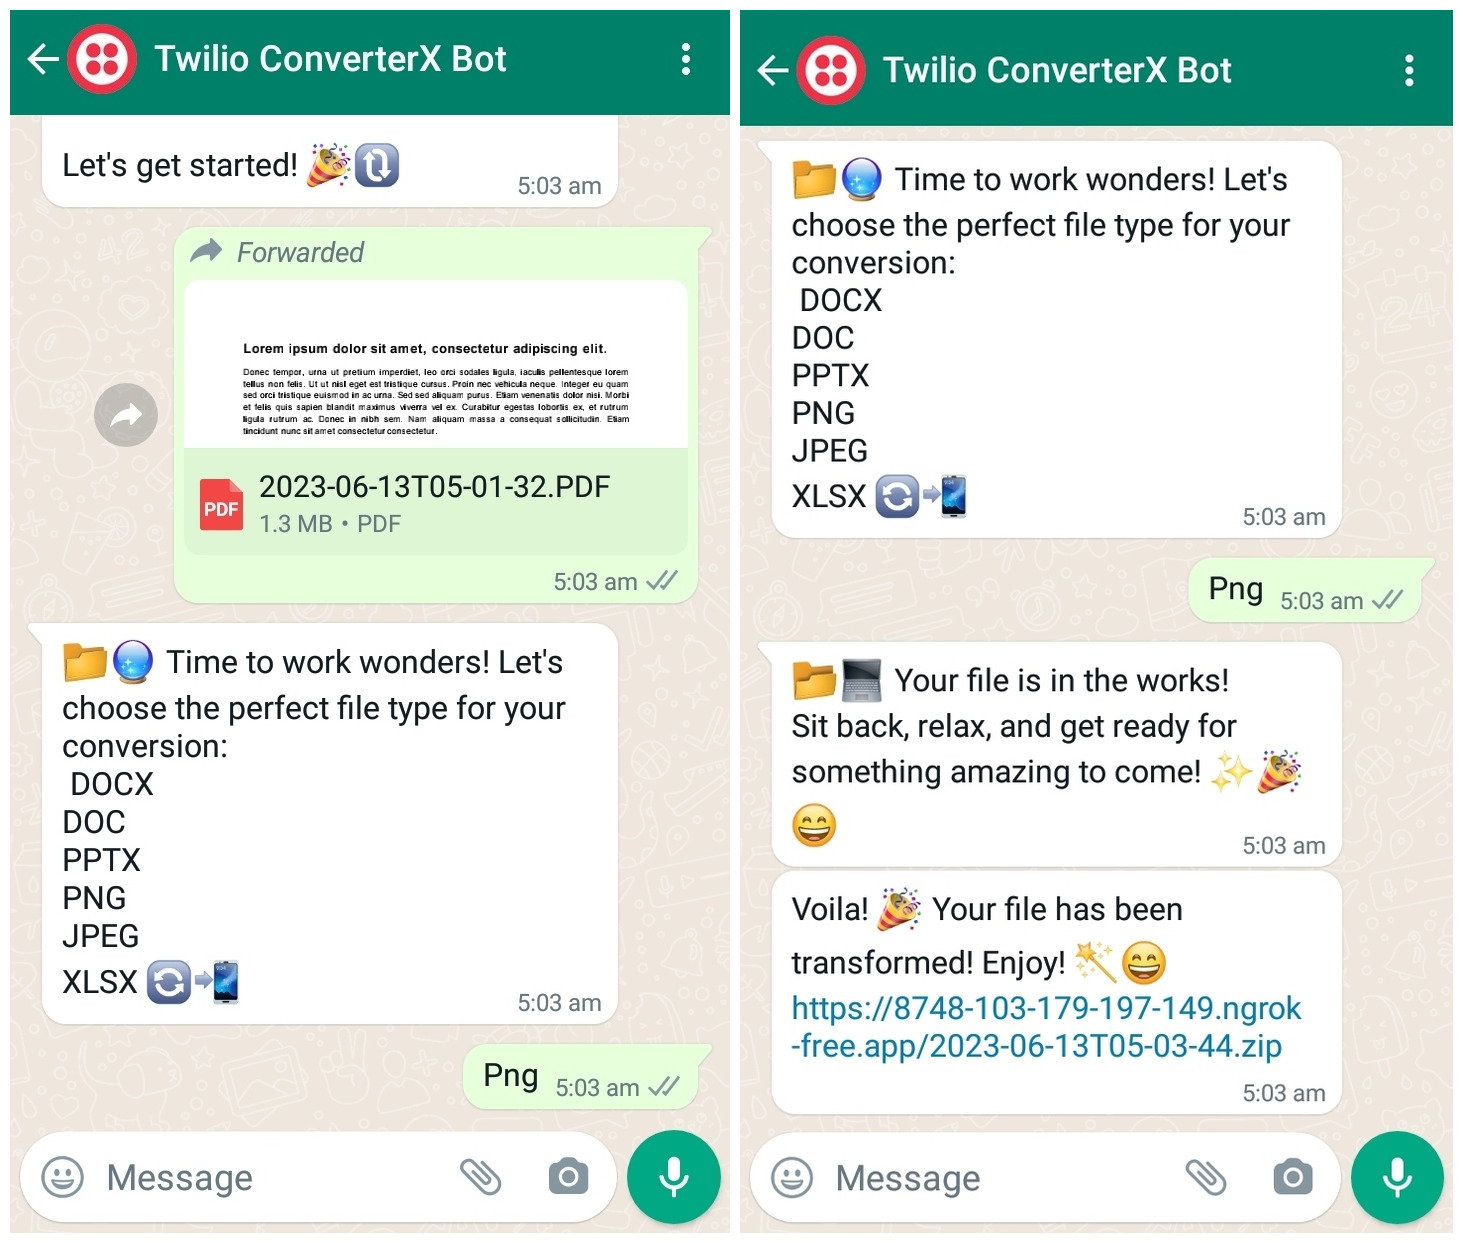 A WhatsApp conversation: A user begins by sending a PDF file. In response, the chatbot provides a list of file formats to which the PDF can be converted. The user then sends another WhatsApp message, specifying "PNG." The bot responds, informing the user that the file conversion is underway. After some time, the bot sends a link to download the converted files in a zip format. This is necessary because the PDFs contain multiple pages, and each page needs to be converted into an image.